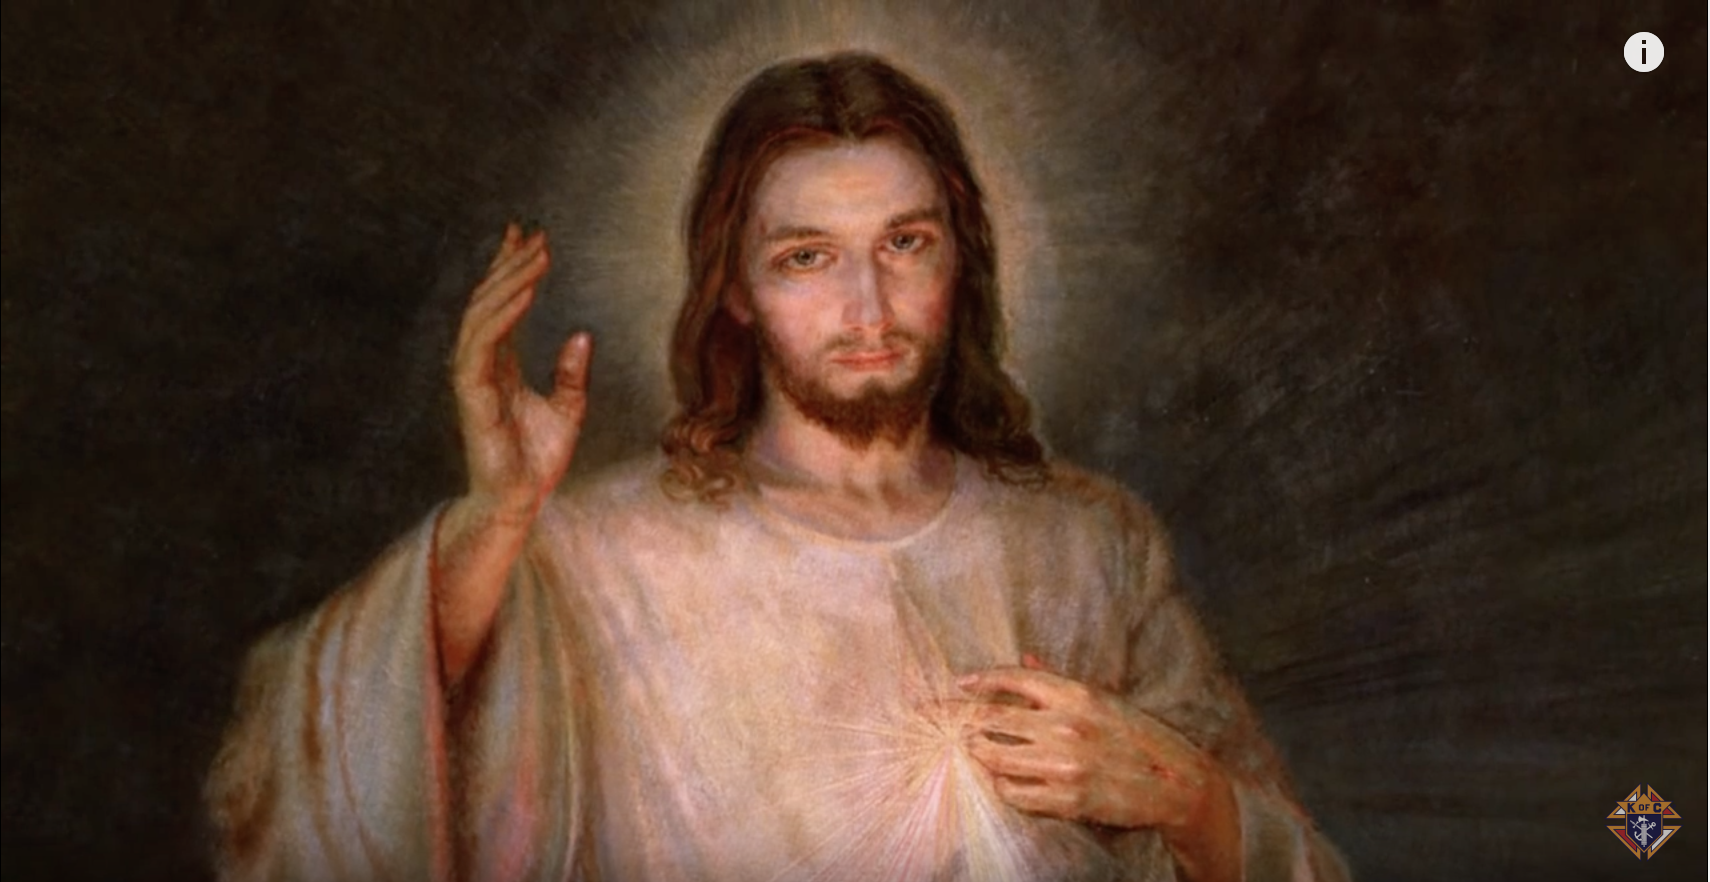 The Divine Mercy Image: An Icon of Mercy